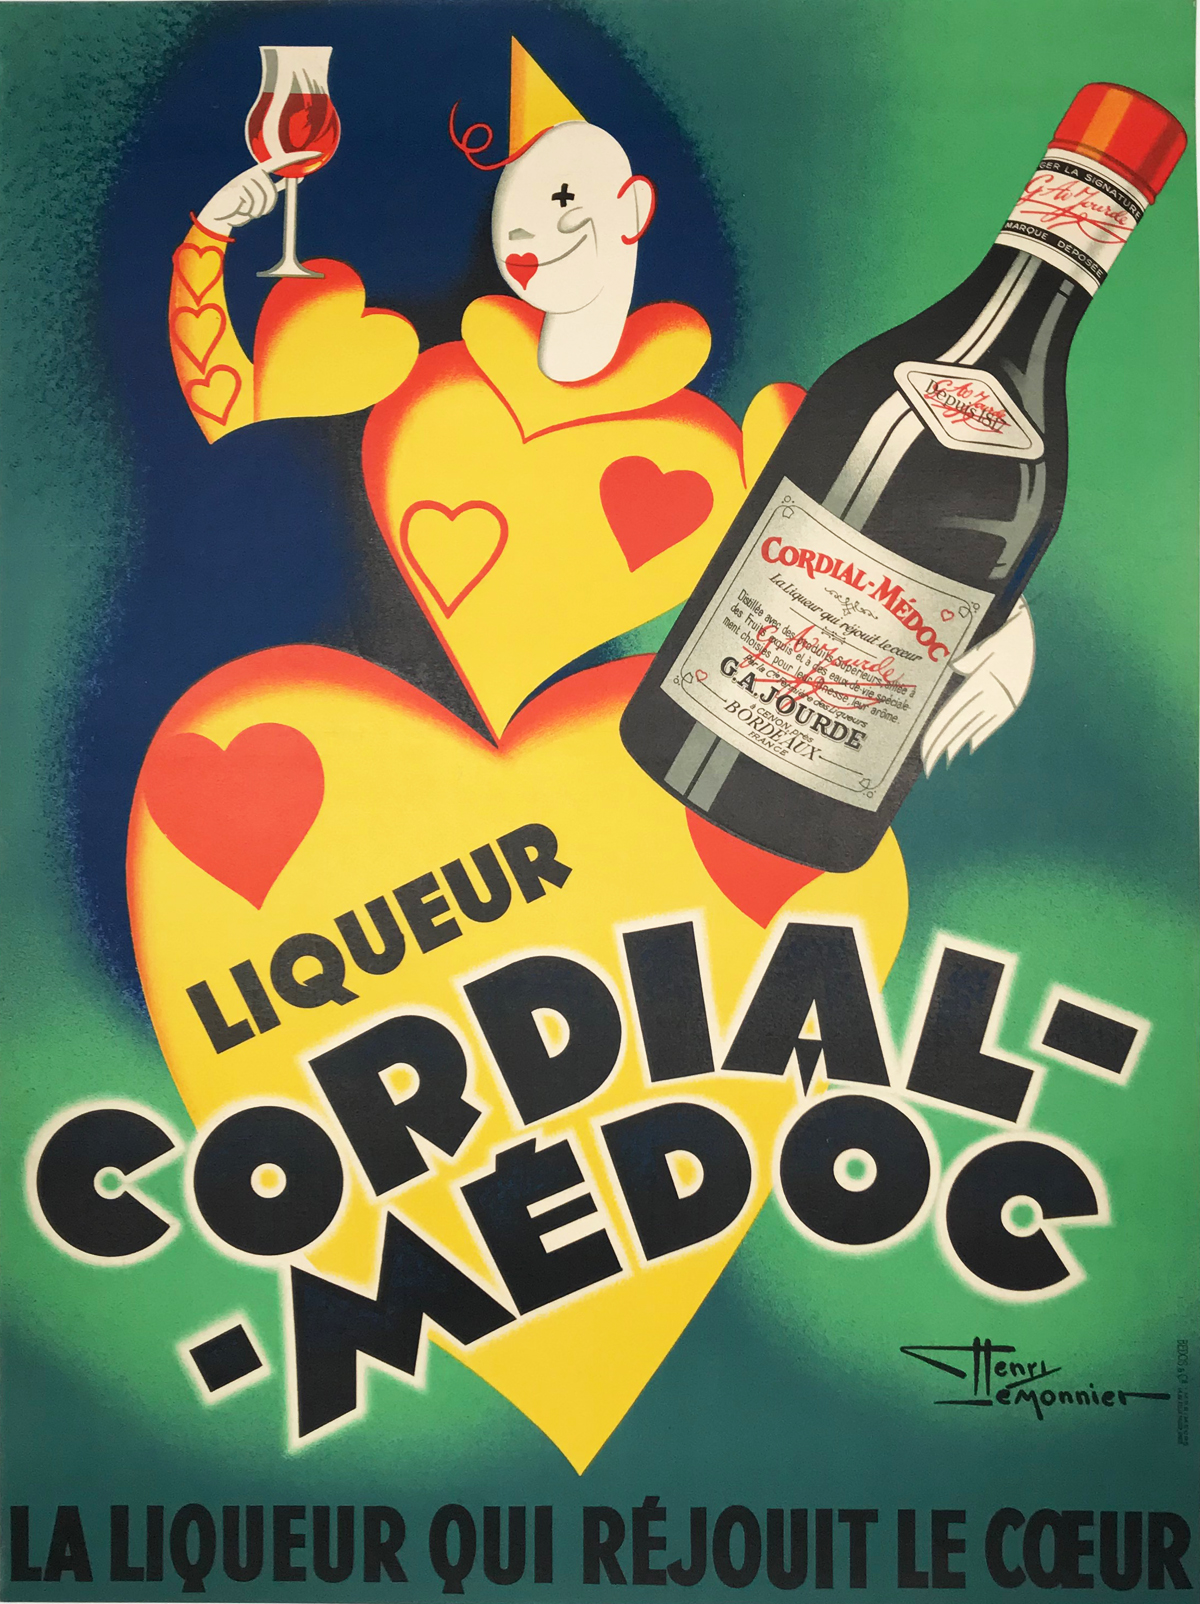 Cordial Medoc - The liquor with heart.. Original 1938 Vintage Lithograph French Poster by H. LeMonnier. Shows a clown with hearts holding a glass and bottle of liqueur. Made to advertise a liqueur which rejoices the heart.